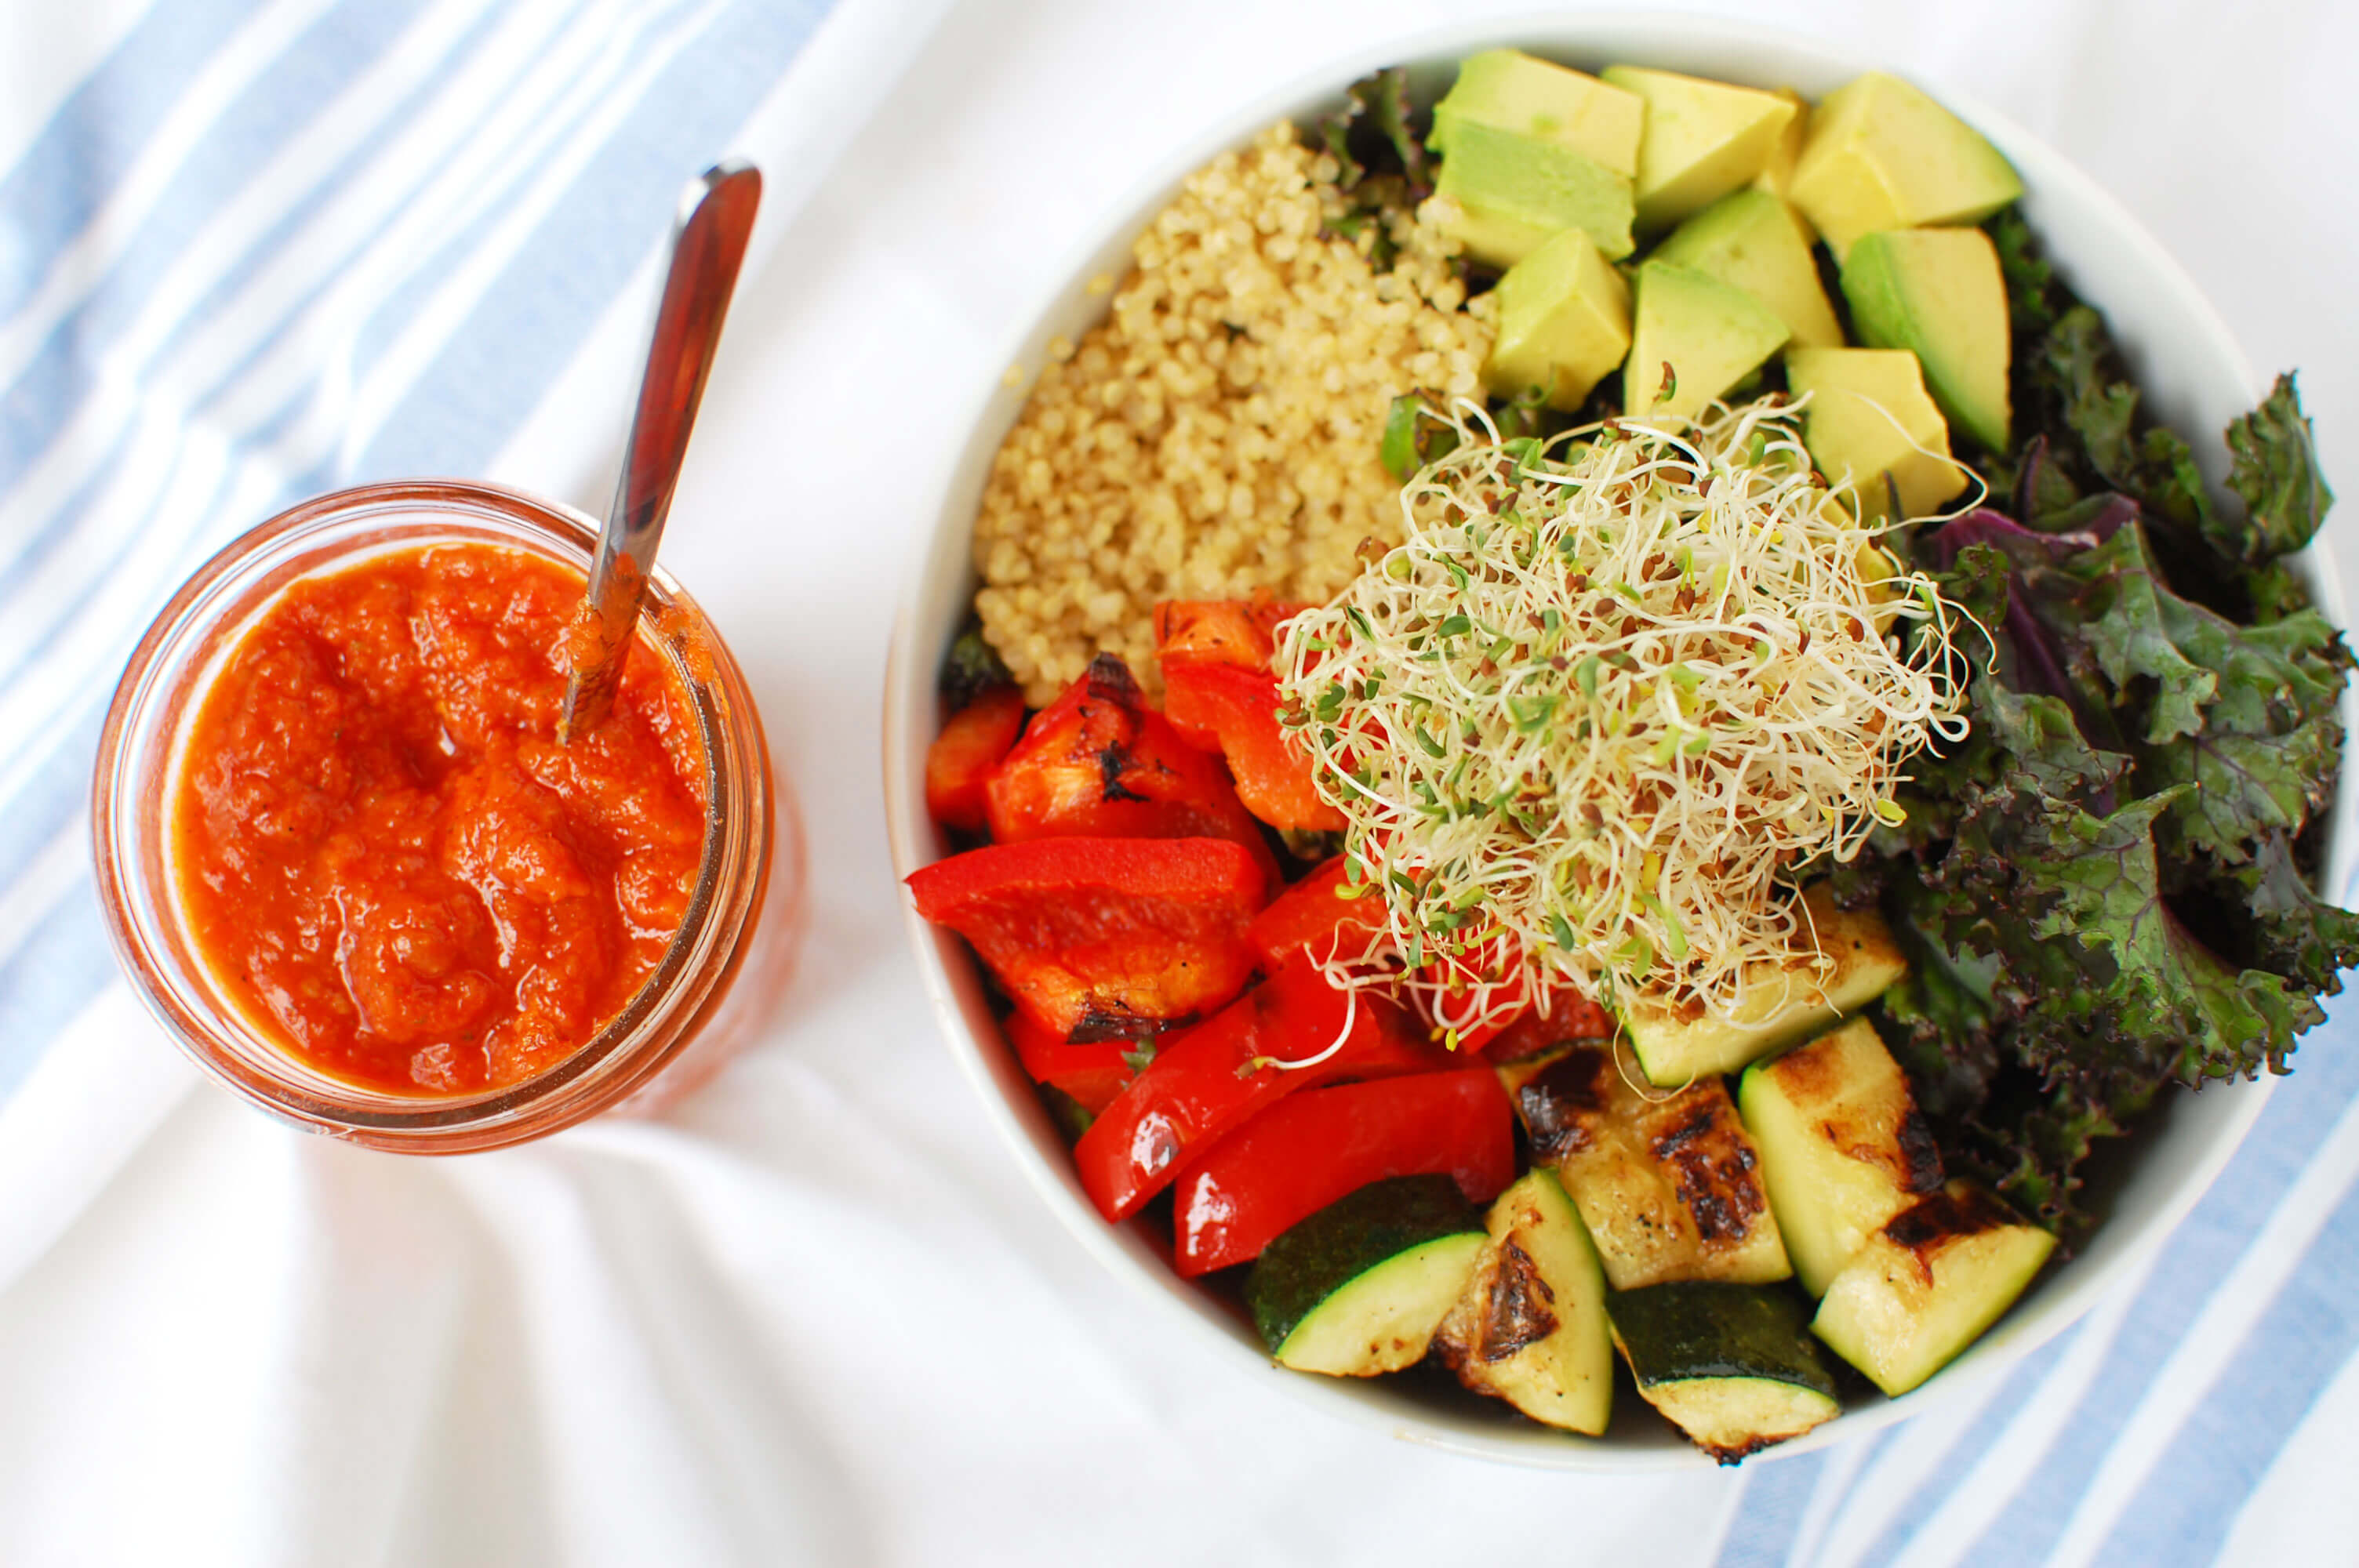 20 Meal Ideas to Help Clients with Eczema: Grilled Vegetable Beach Bowl